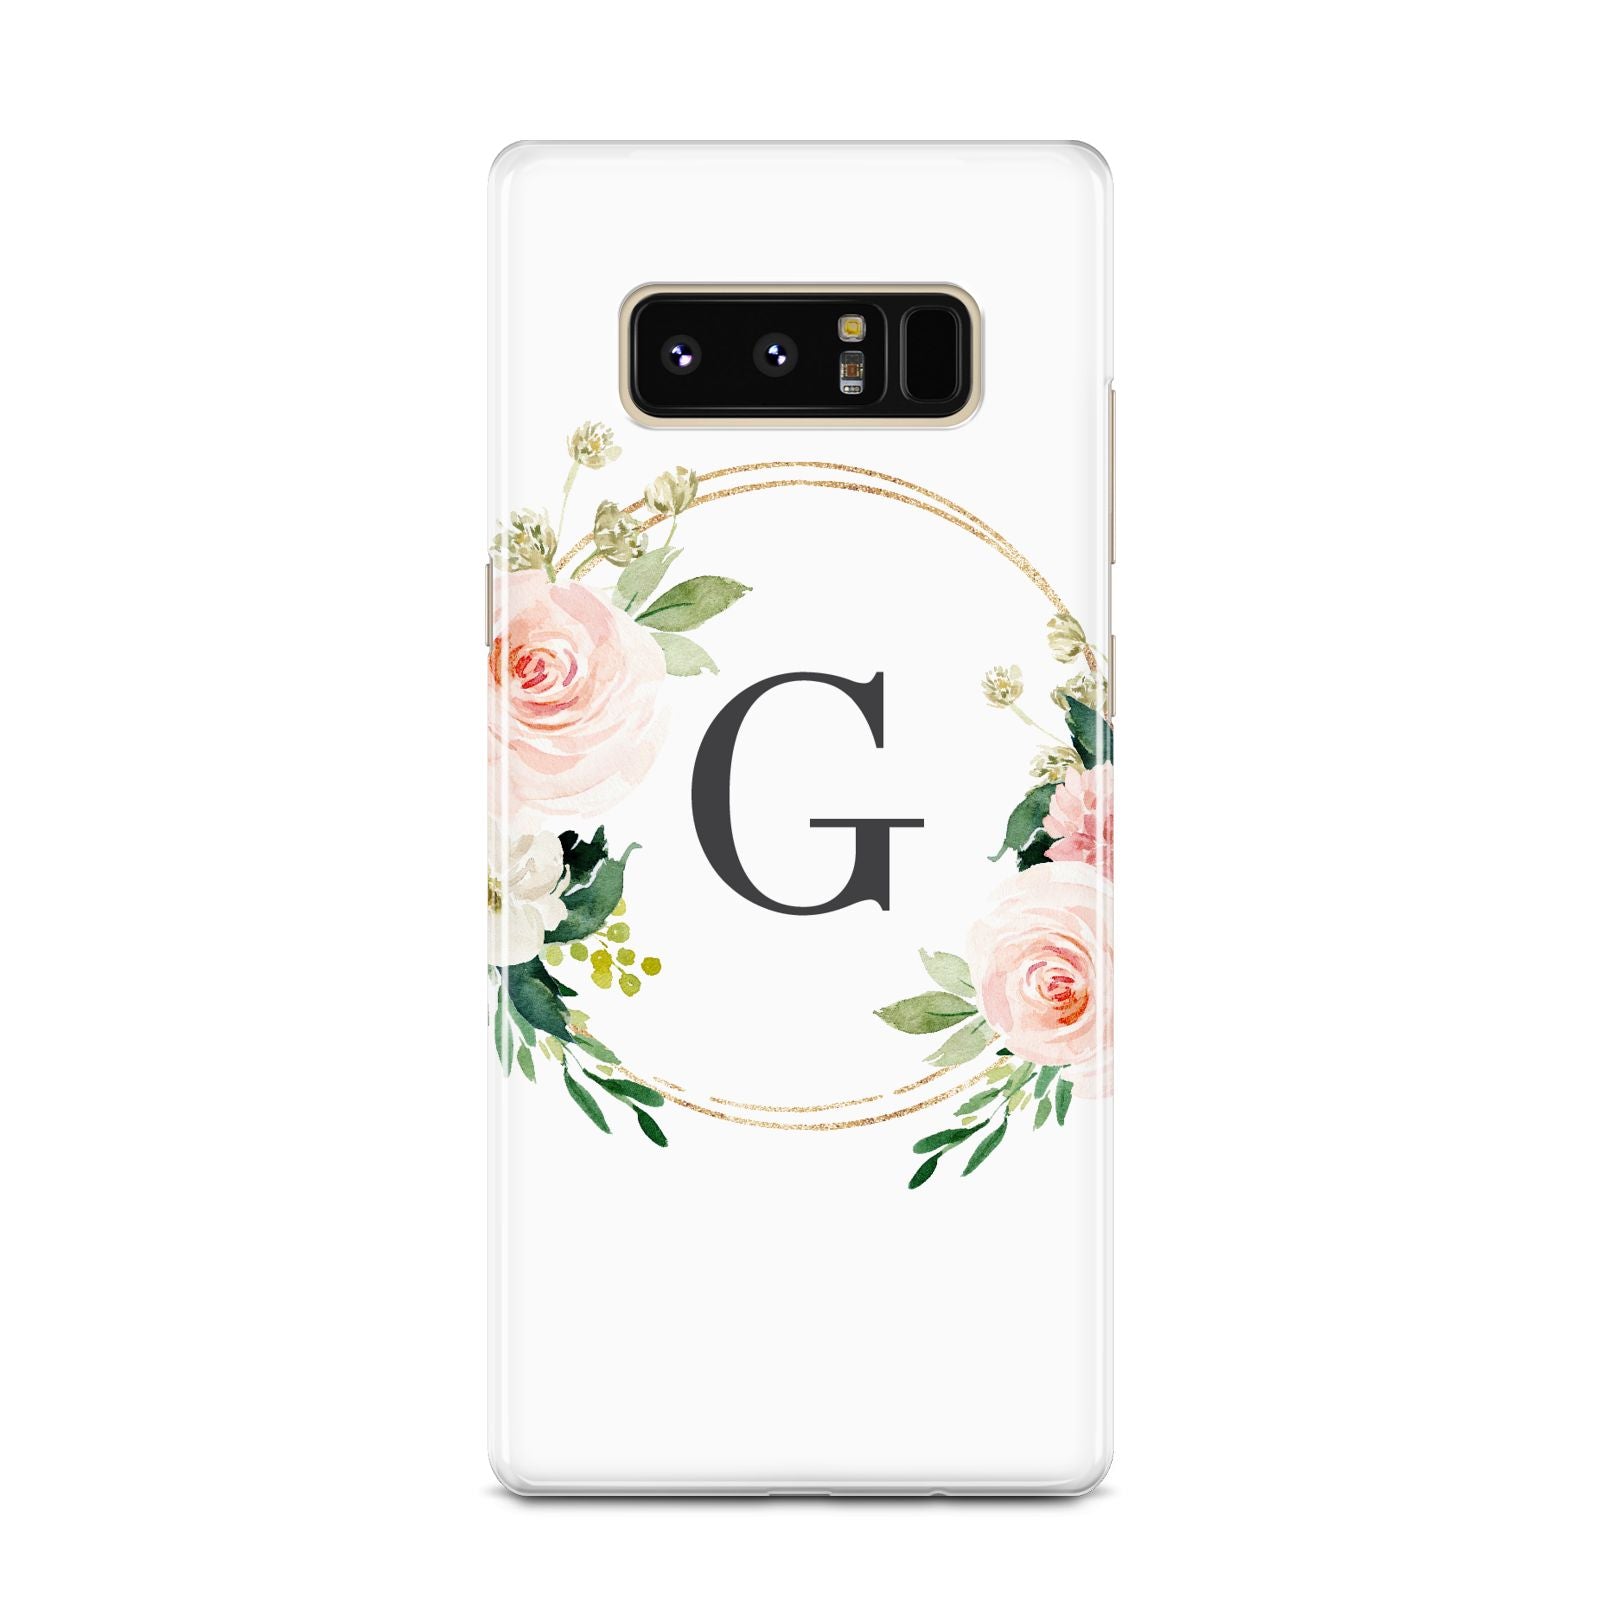 Personalised Blush Floral Wreath Samsung Galaxy Note 8 Case